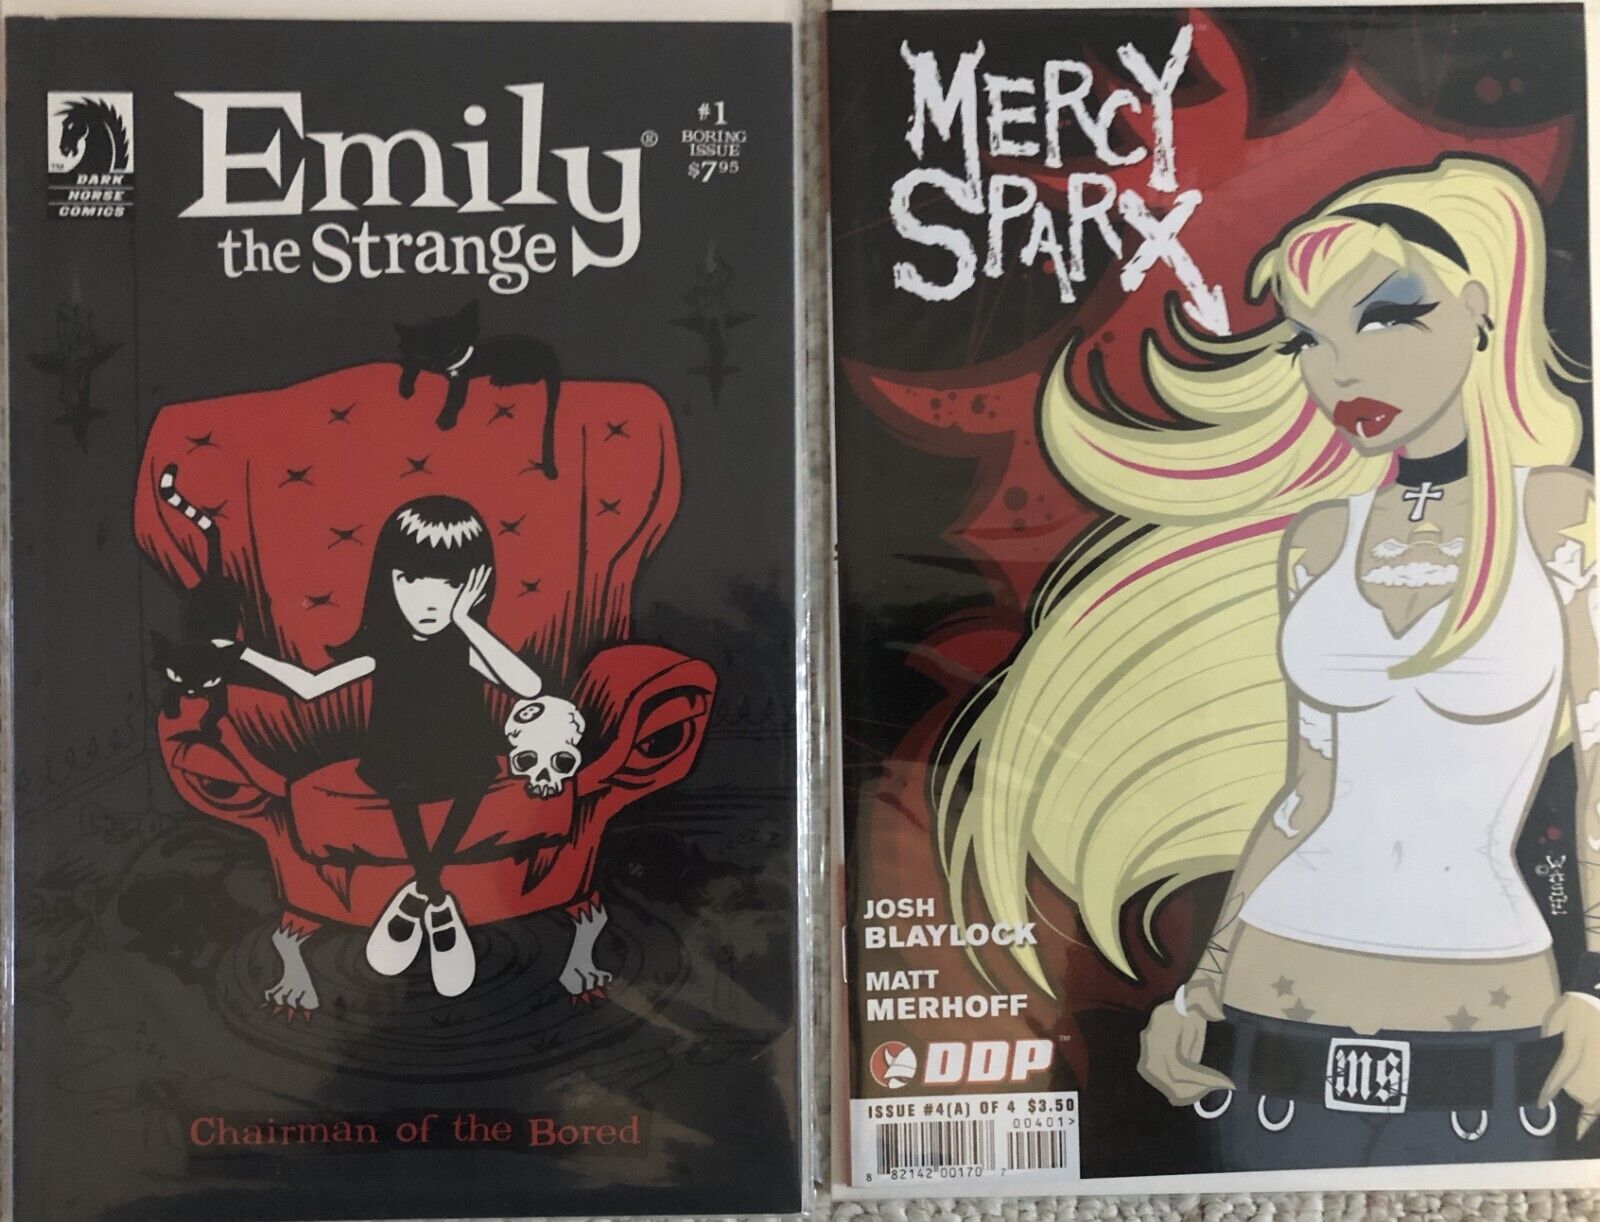 EMILY THE STRANGE #1 AND MERCY SPARX #4 of #4 - GIRL STRONG COMBO